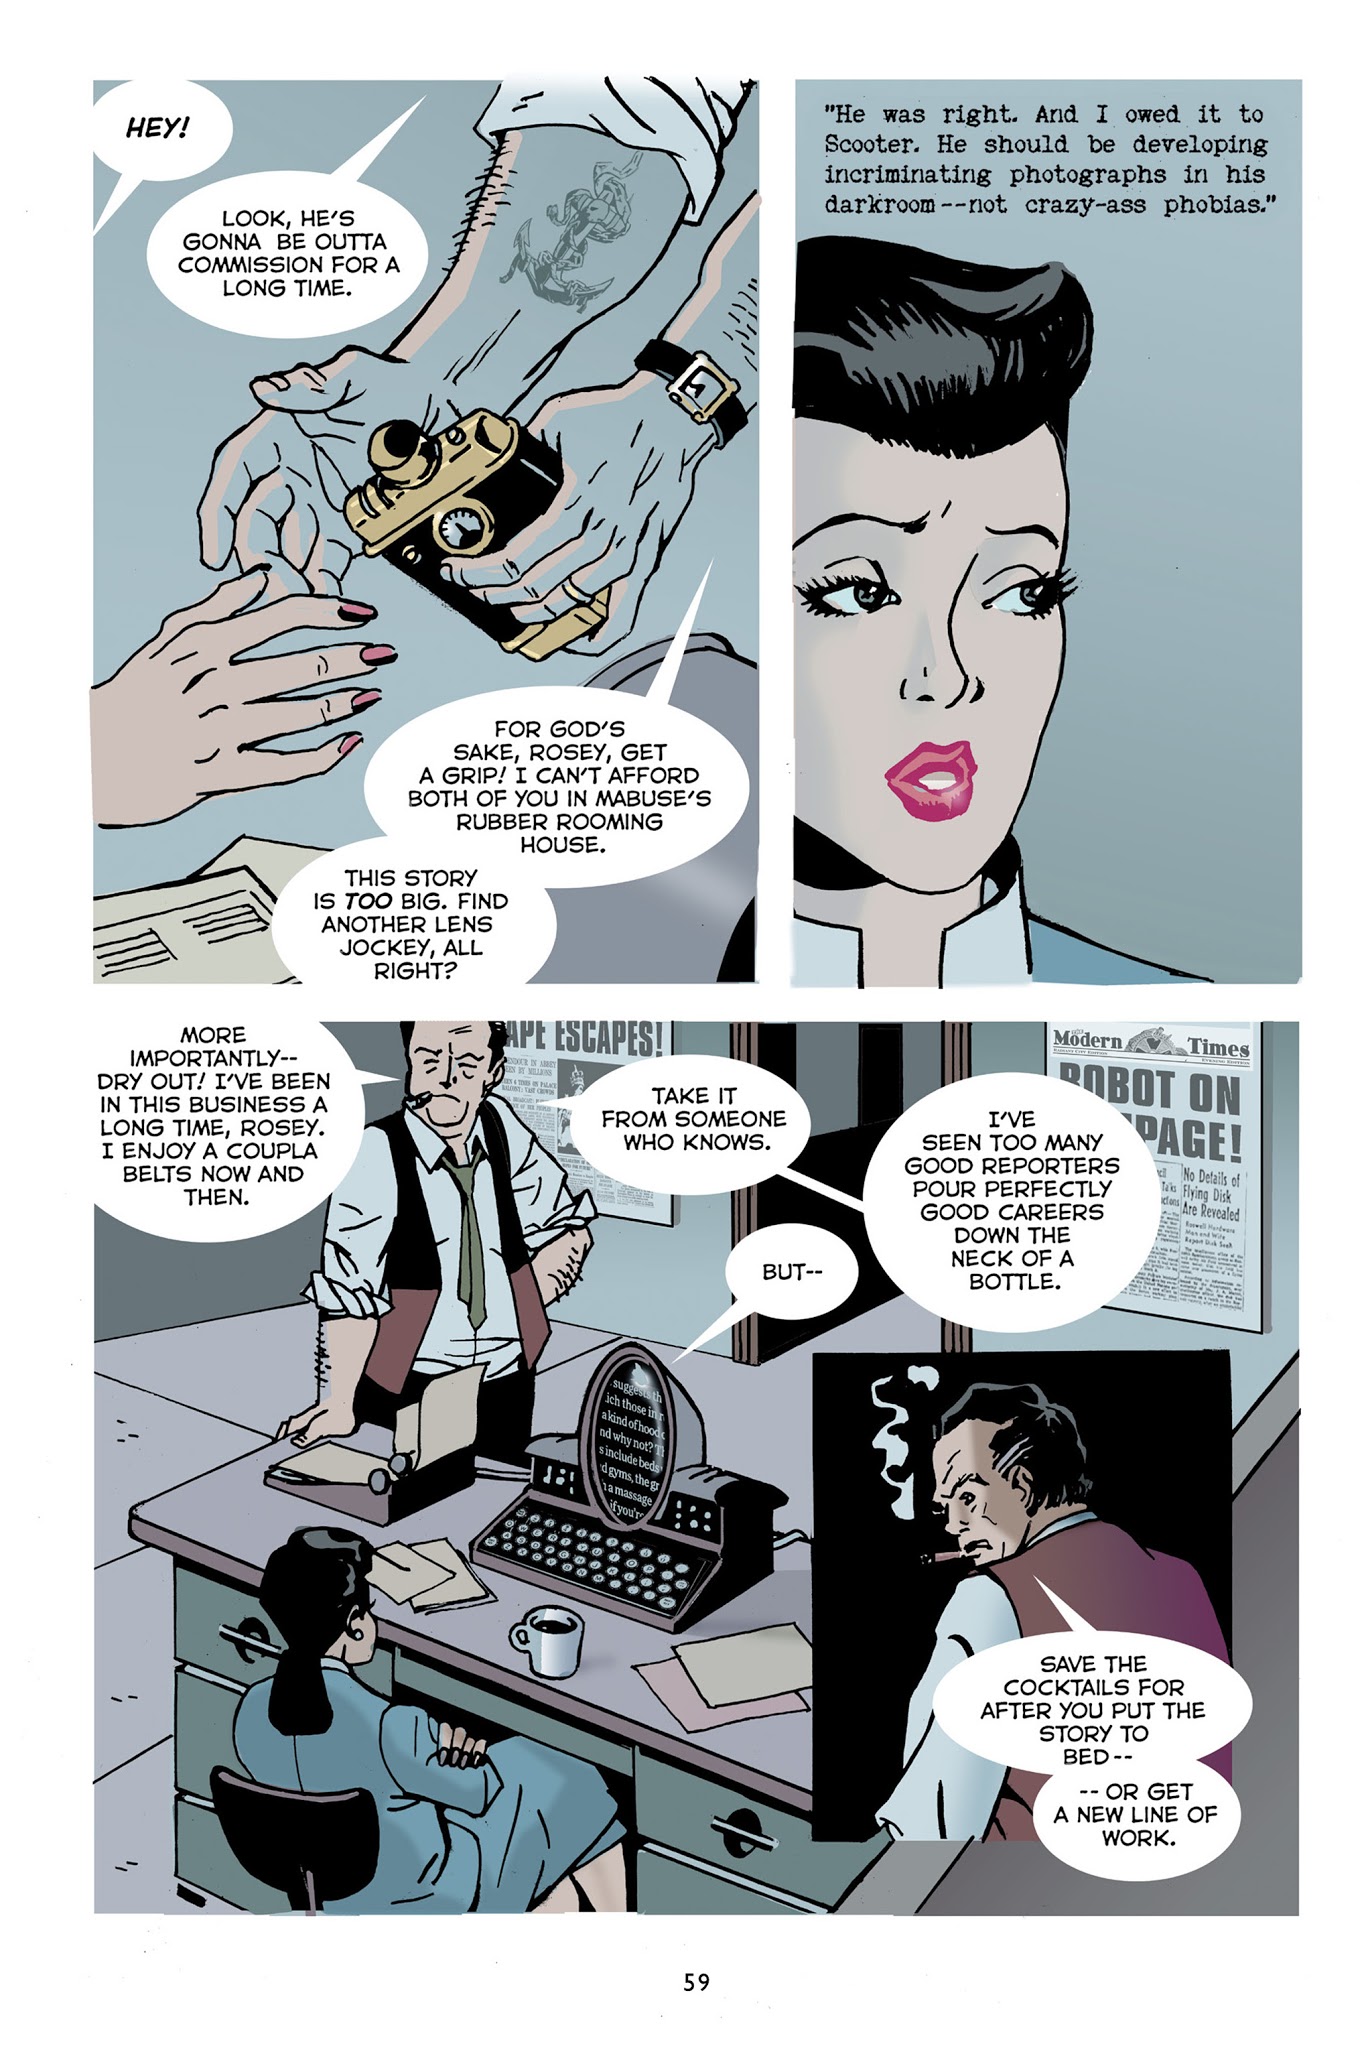 Read online Mister X: Eviction comic -  Issue # TPB - 60